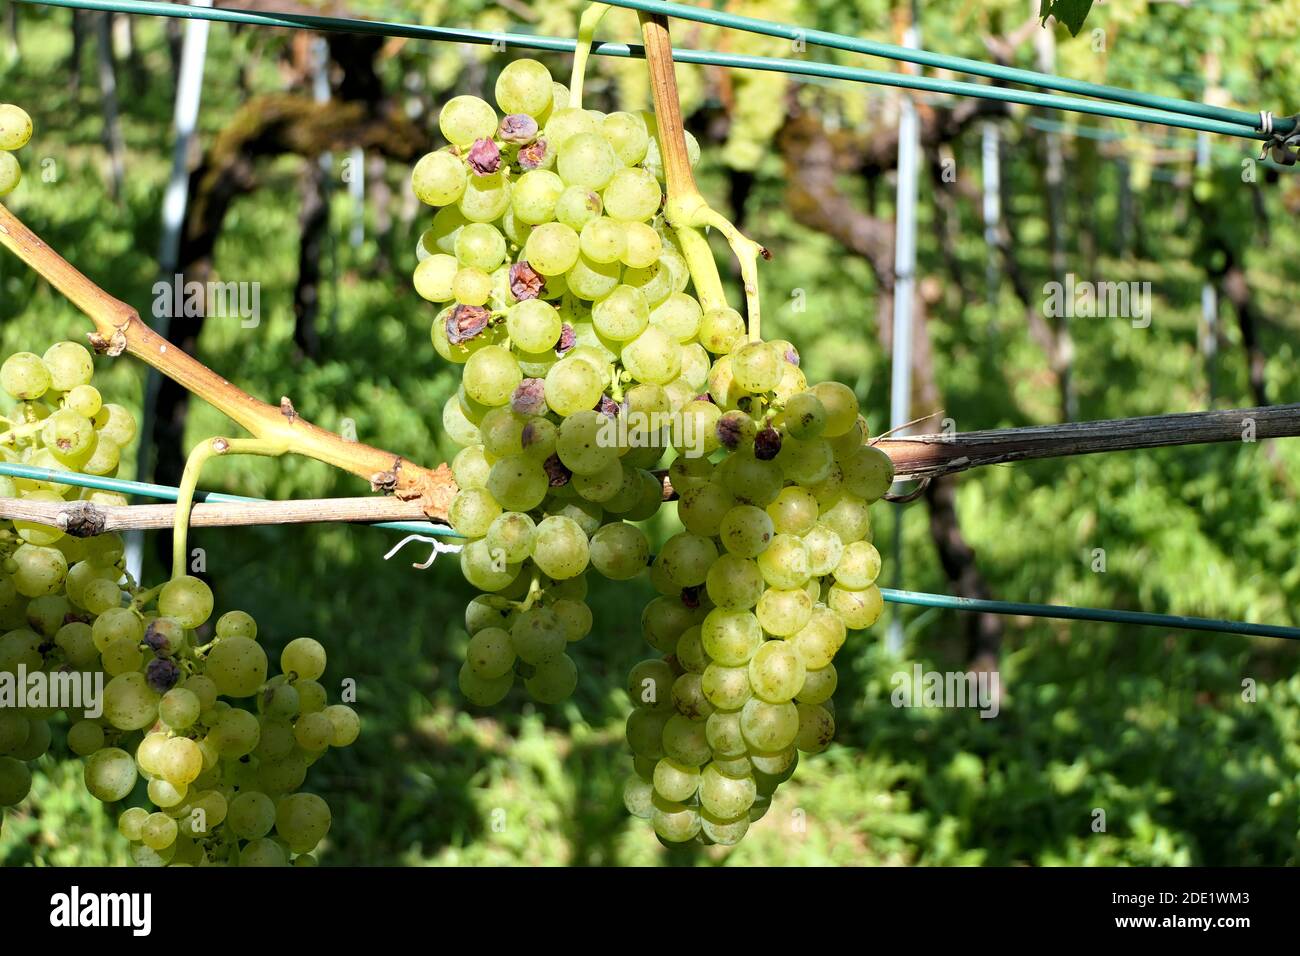 Bunch full of juicy grapes growing on vineyard Stock Photo